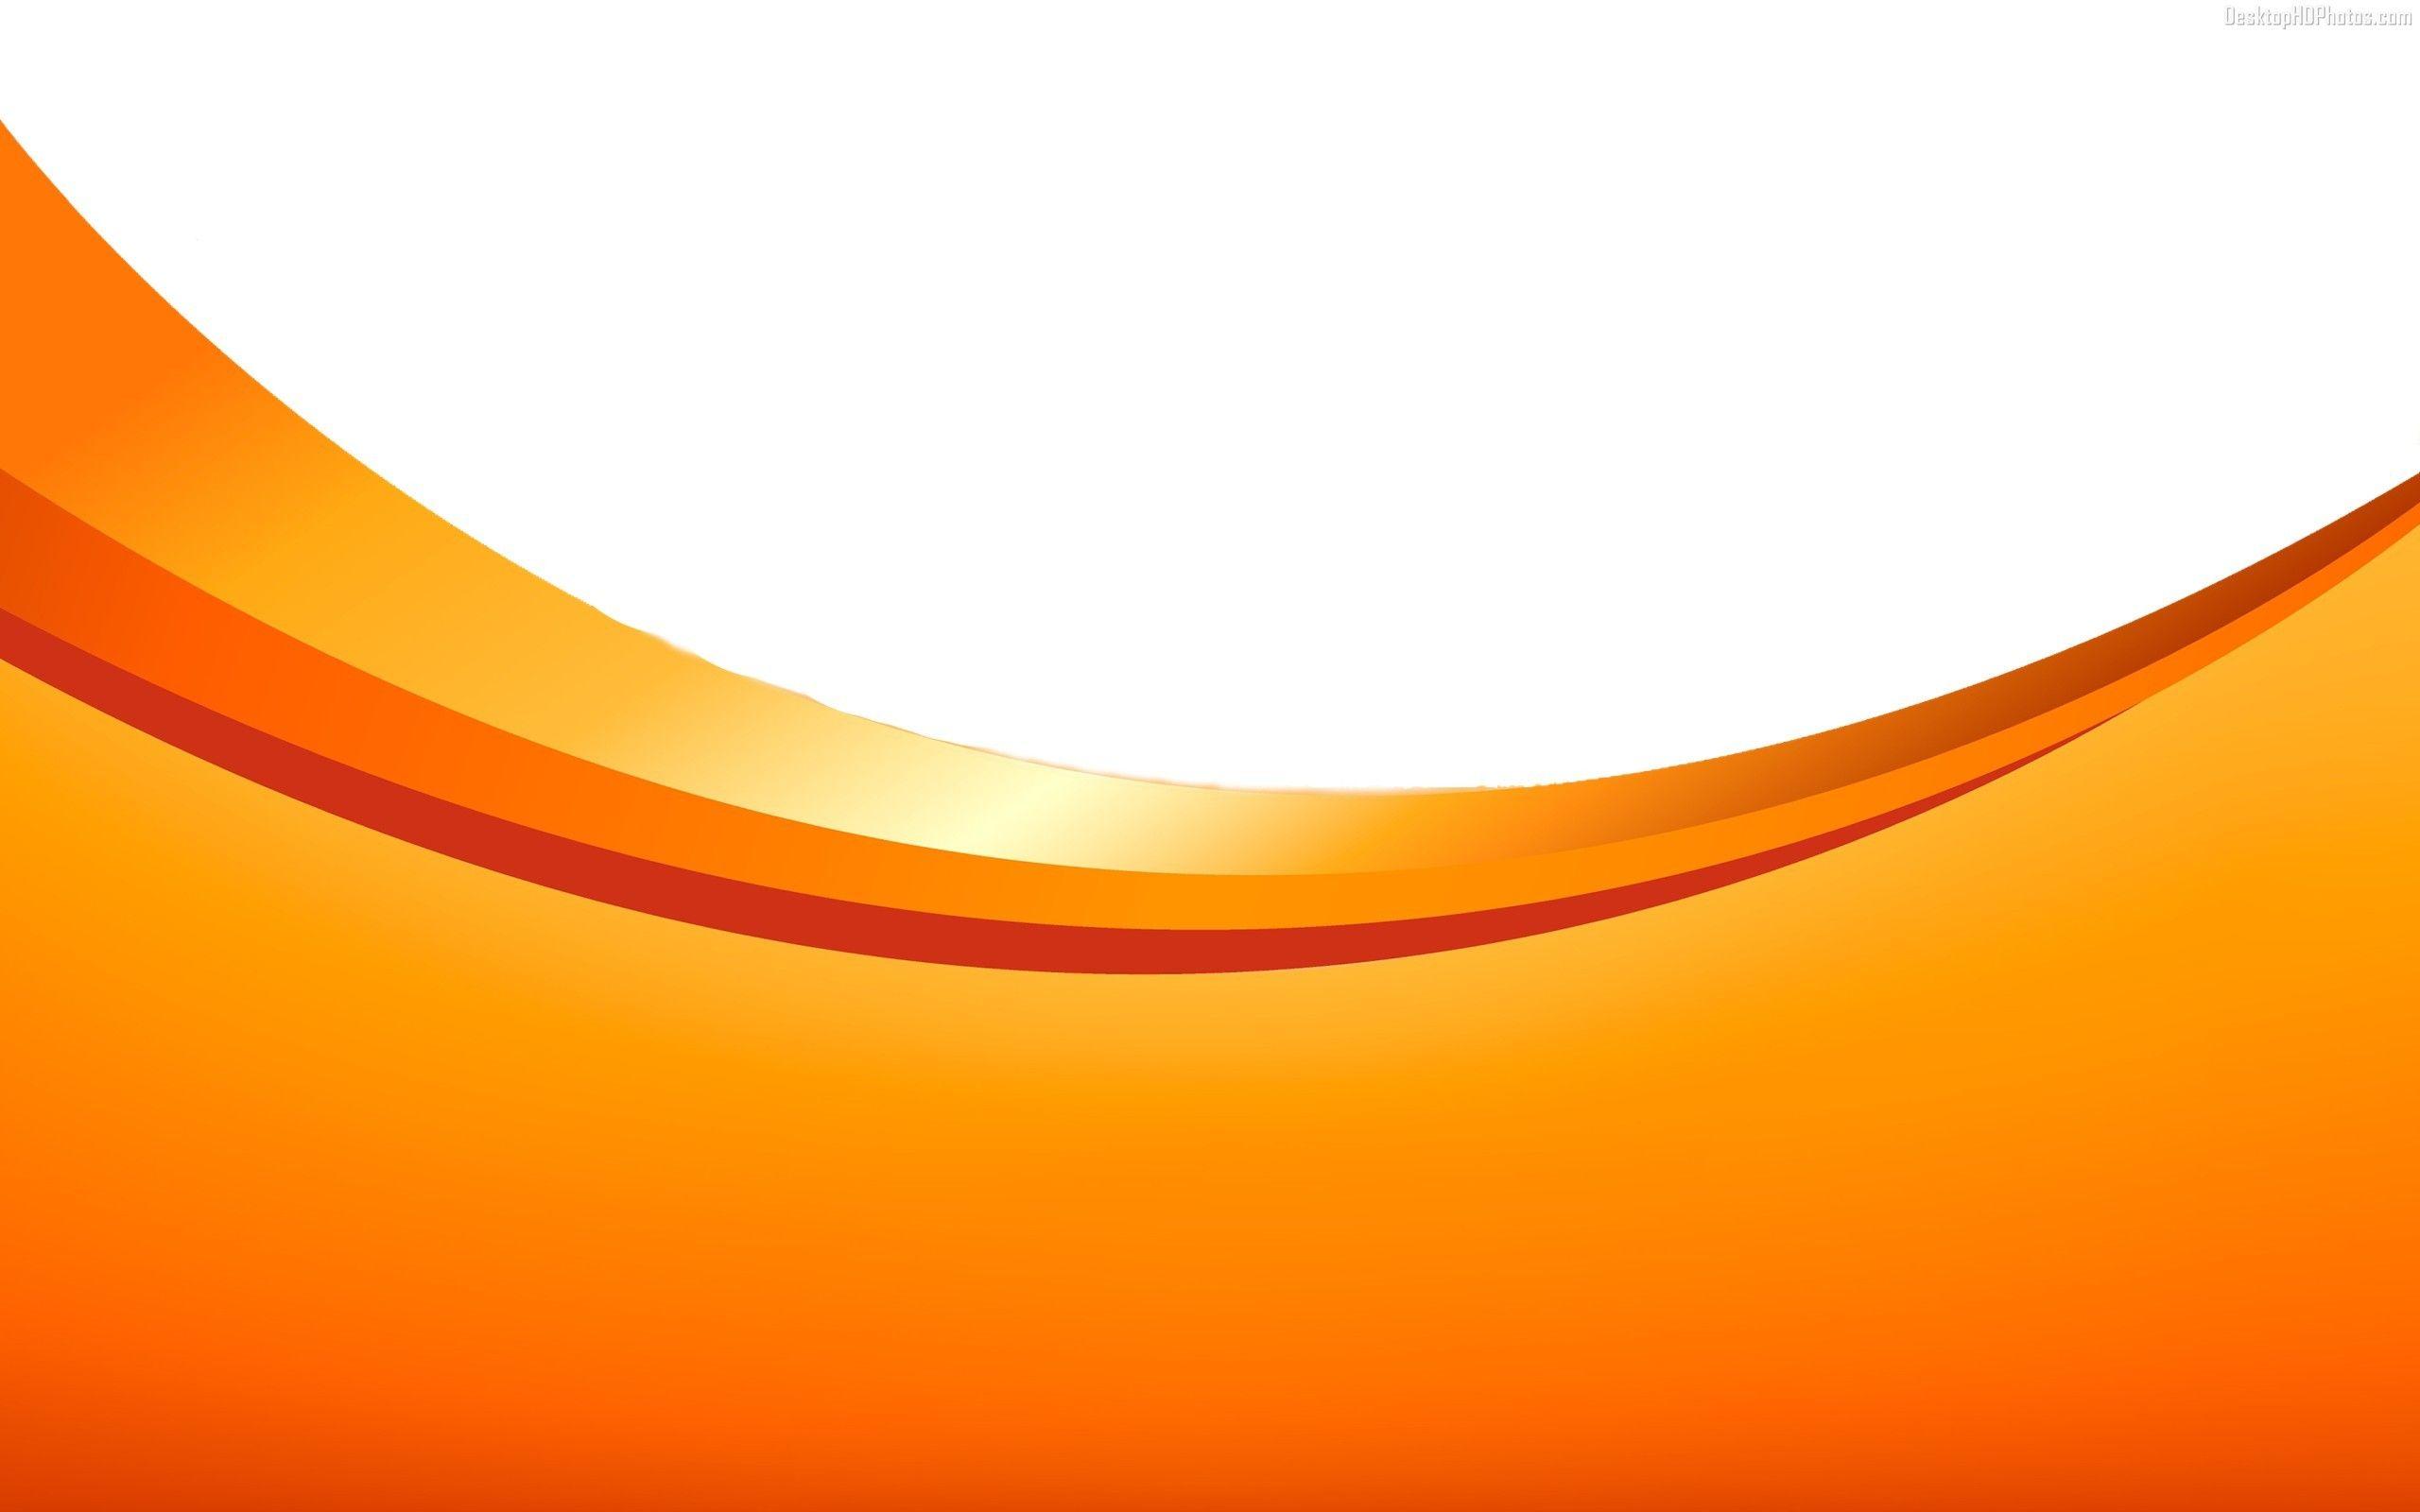 white and orange background 8. Background Check All